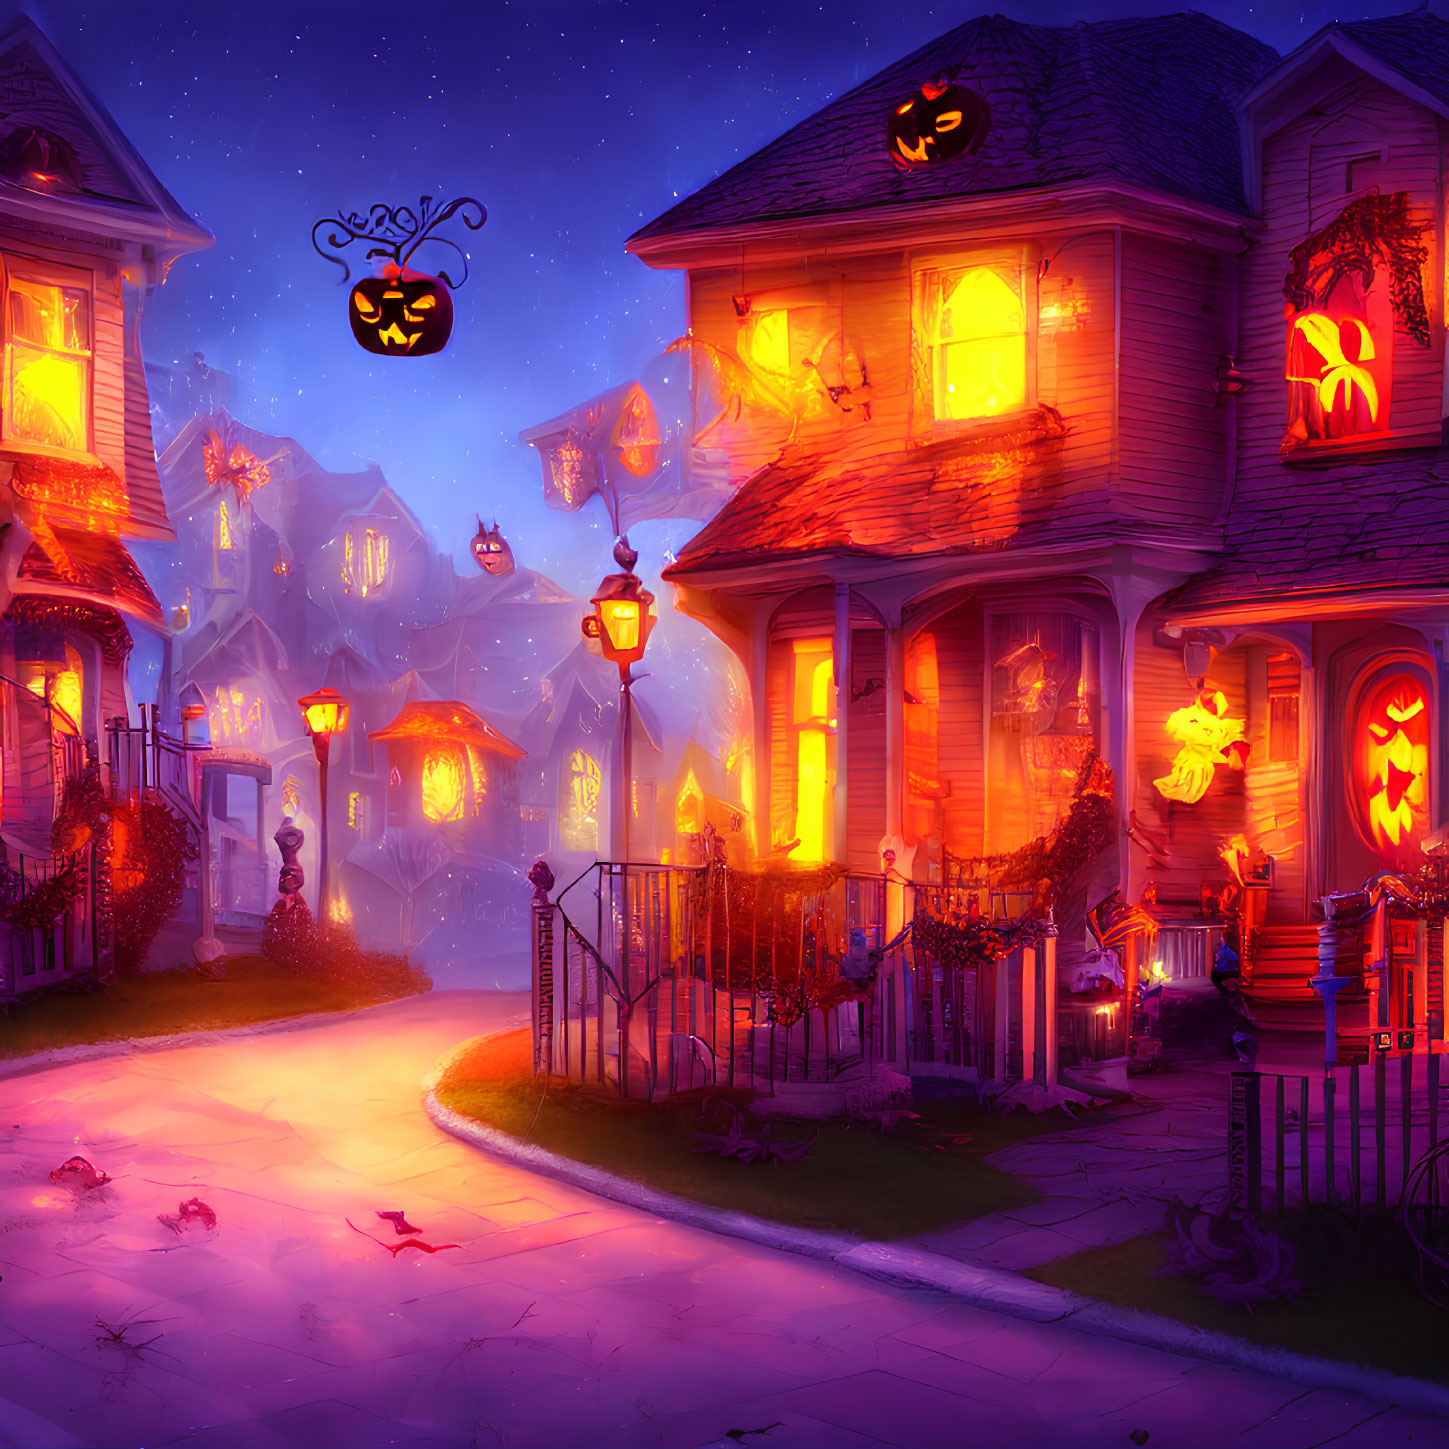 Spooky Halloween street scene with decorated houses and floating jack-o'-lanterns